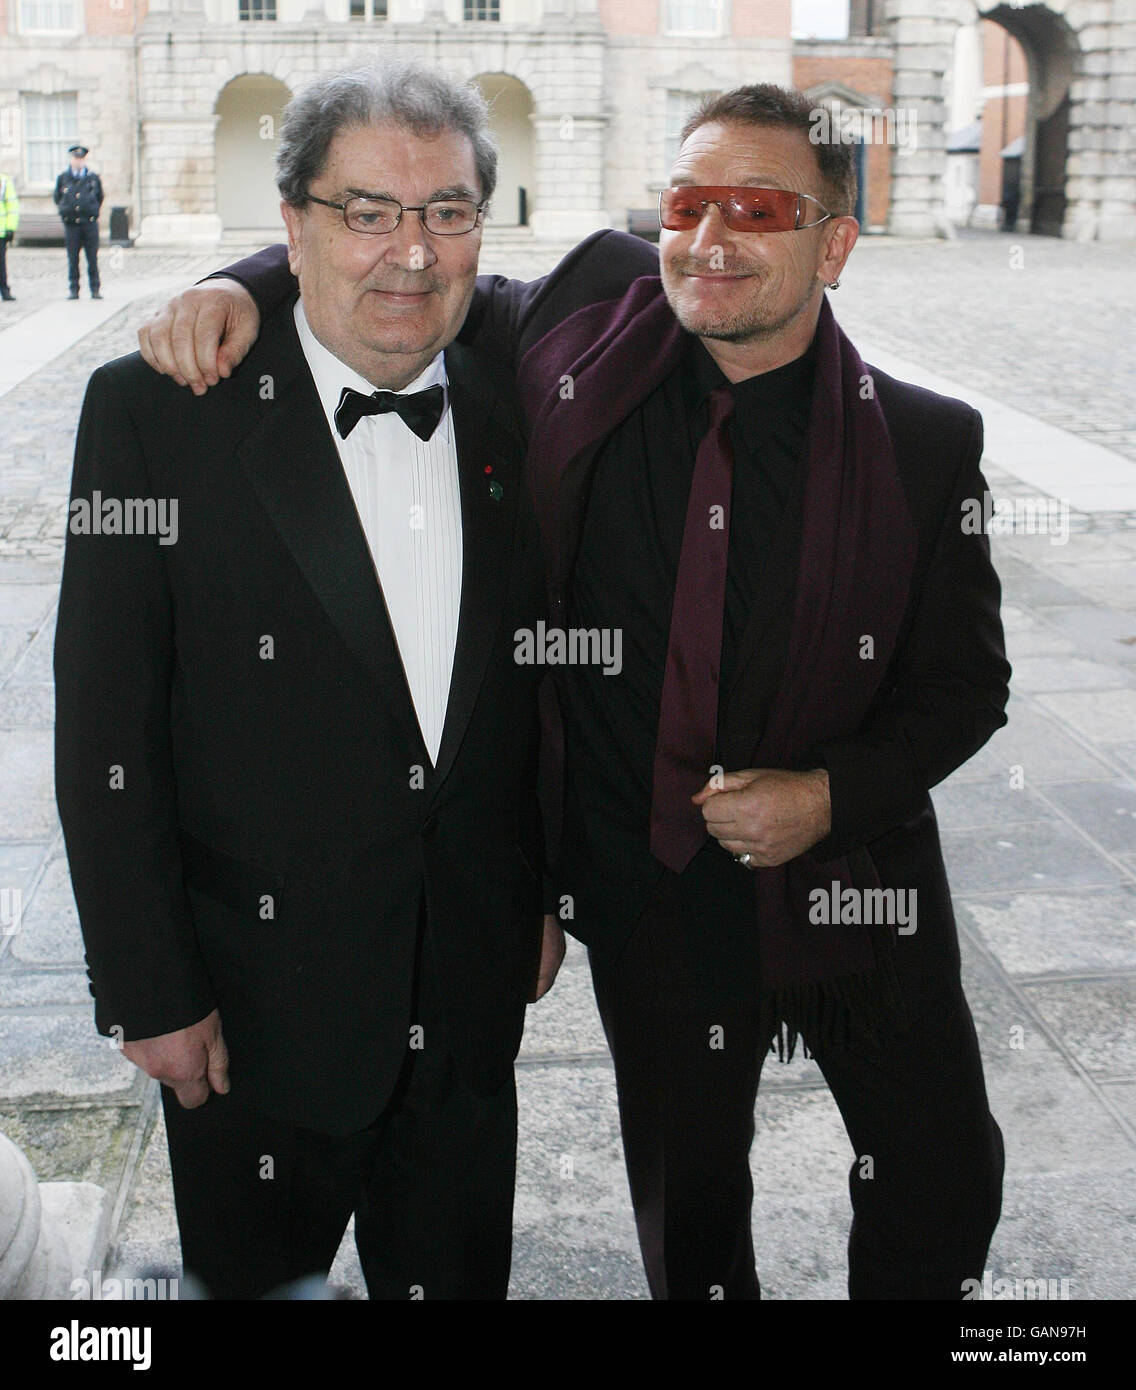 Former SDLP leader John Hume, left and rockstar Bono arrive at Dublin Castle for a gala dinner which forms part of a series of events to mark the 10th anniversary of the Good Friday Agreement. Stock Photo